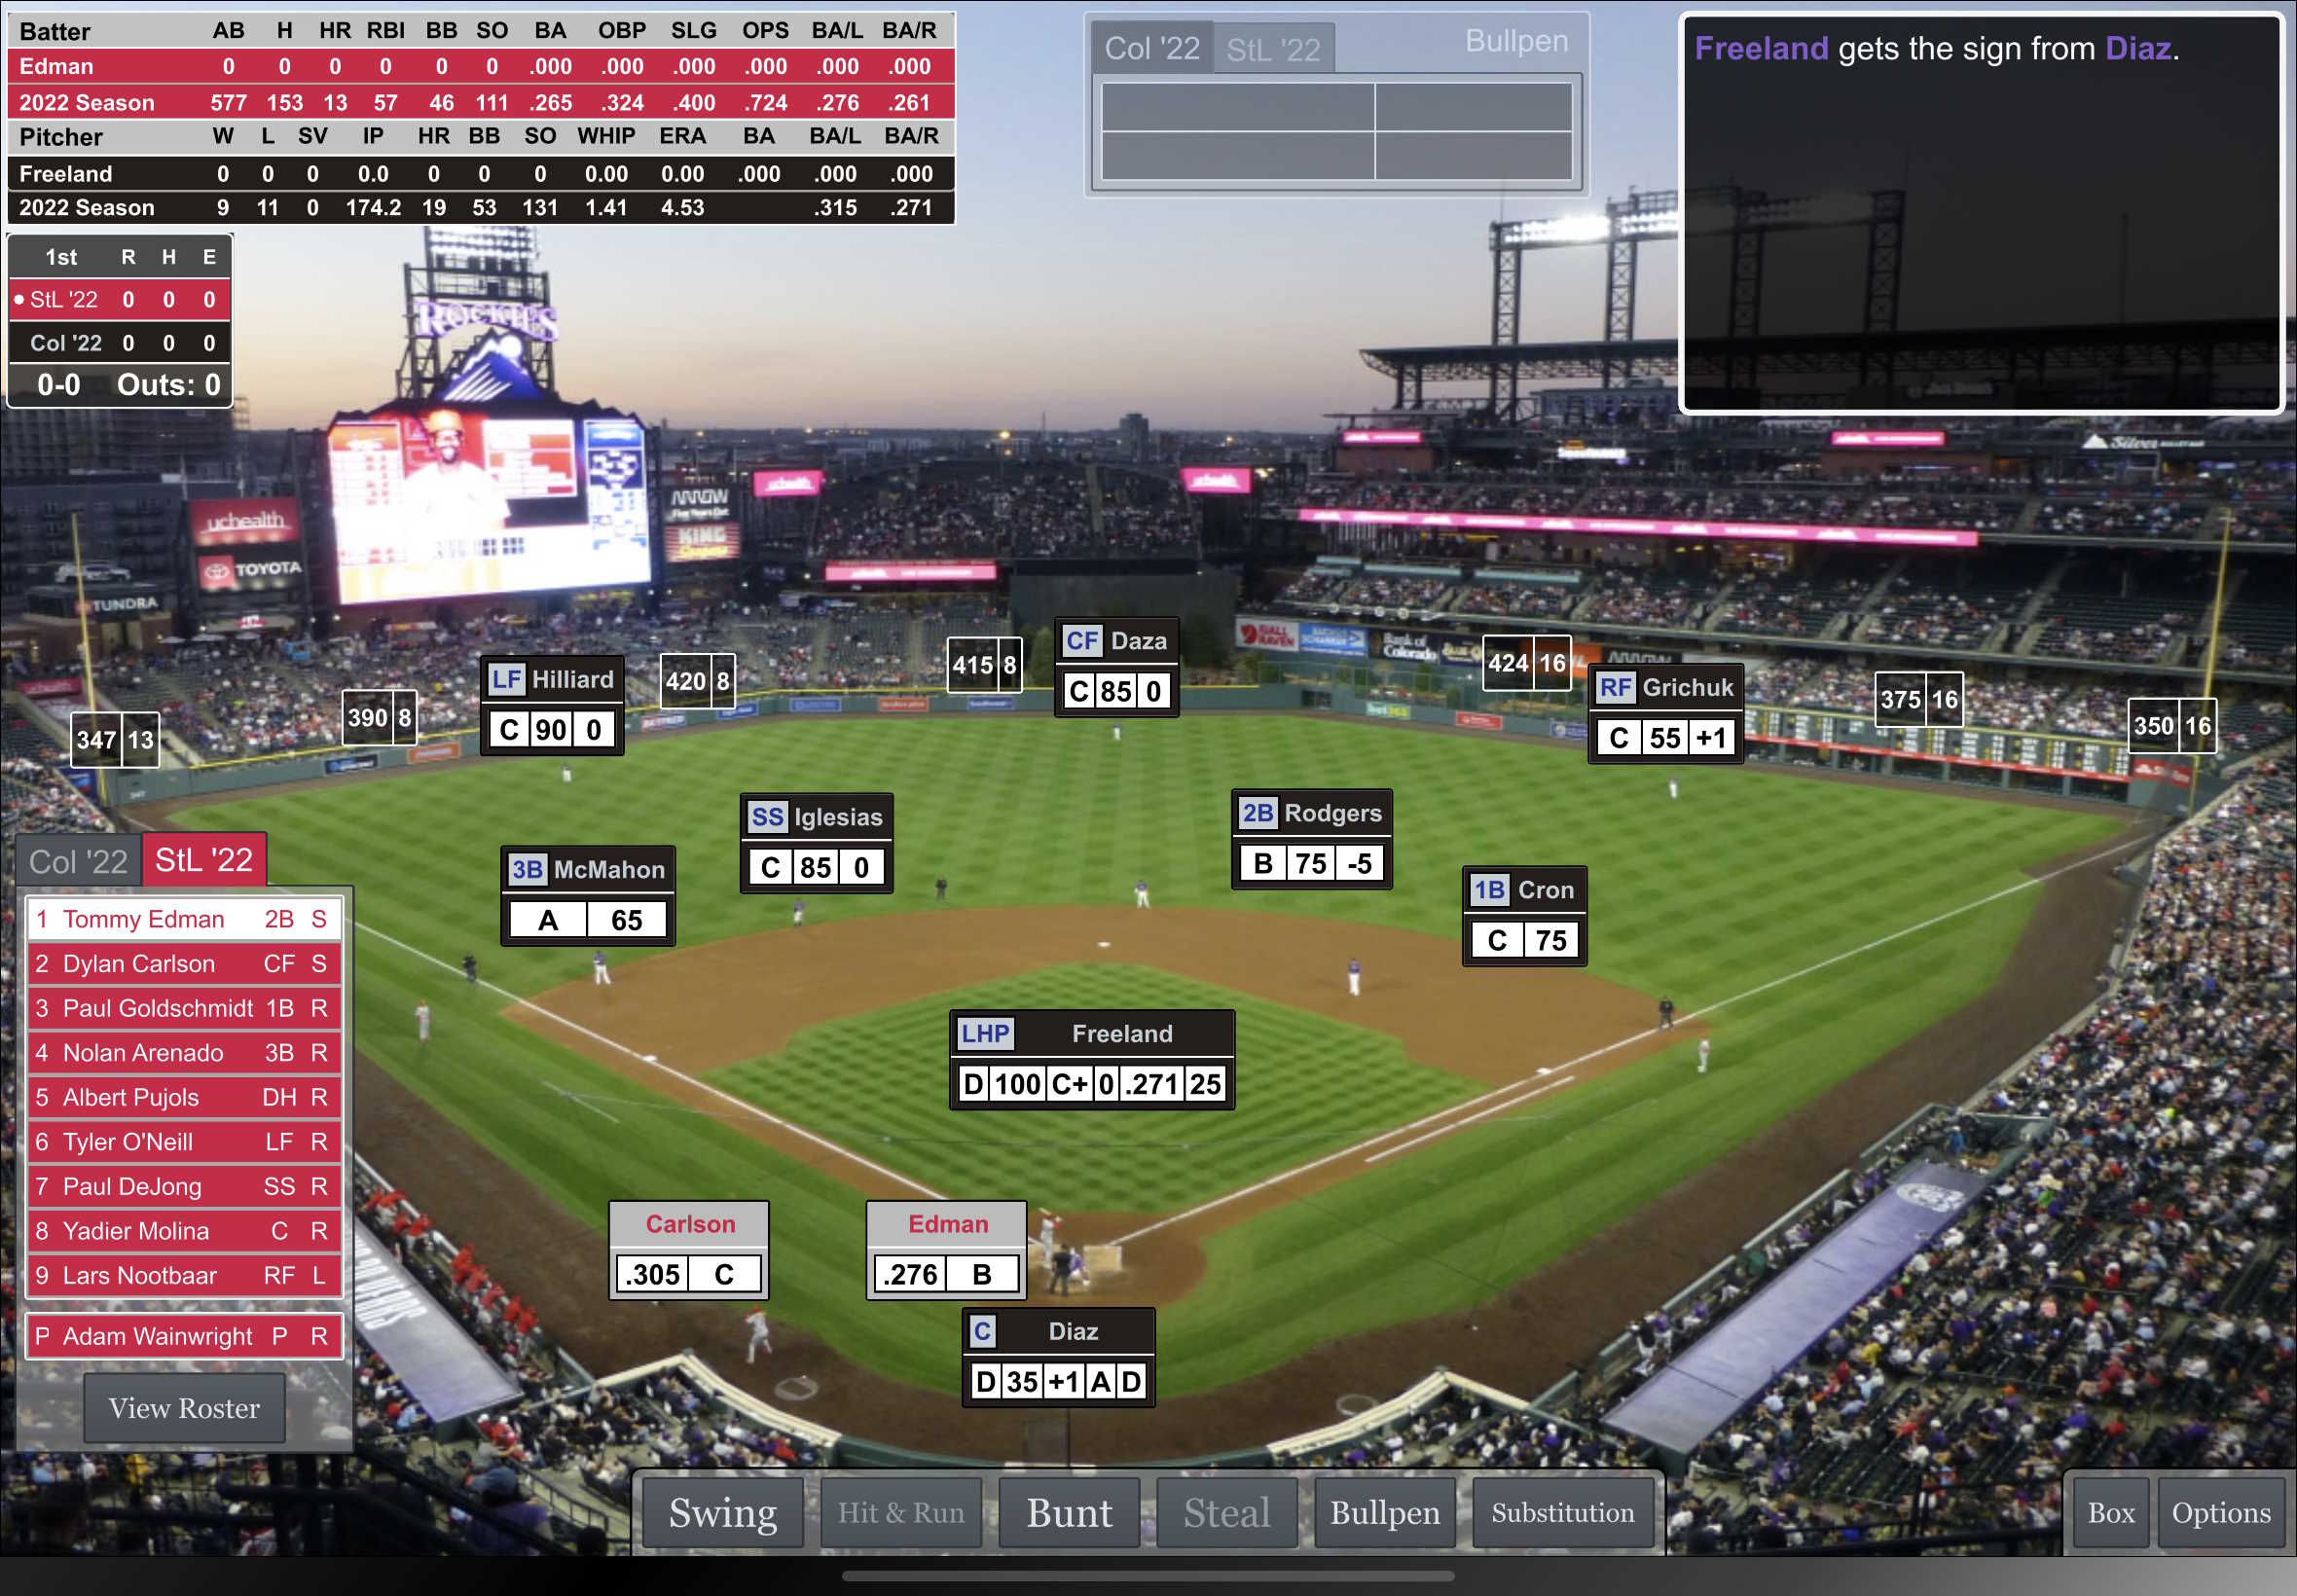 DYNASTY League Baseball Powered By Pursue the Pennant Play on Apple Mac, Windows, iPad, iPhone, Android or the original Board version.